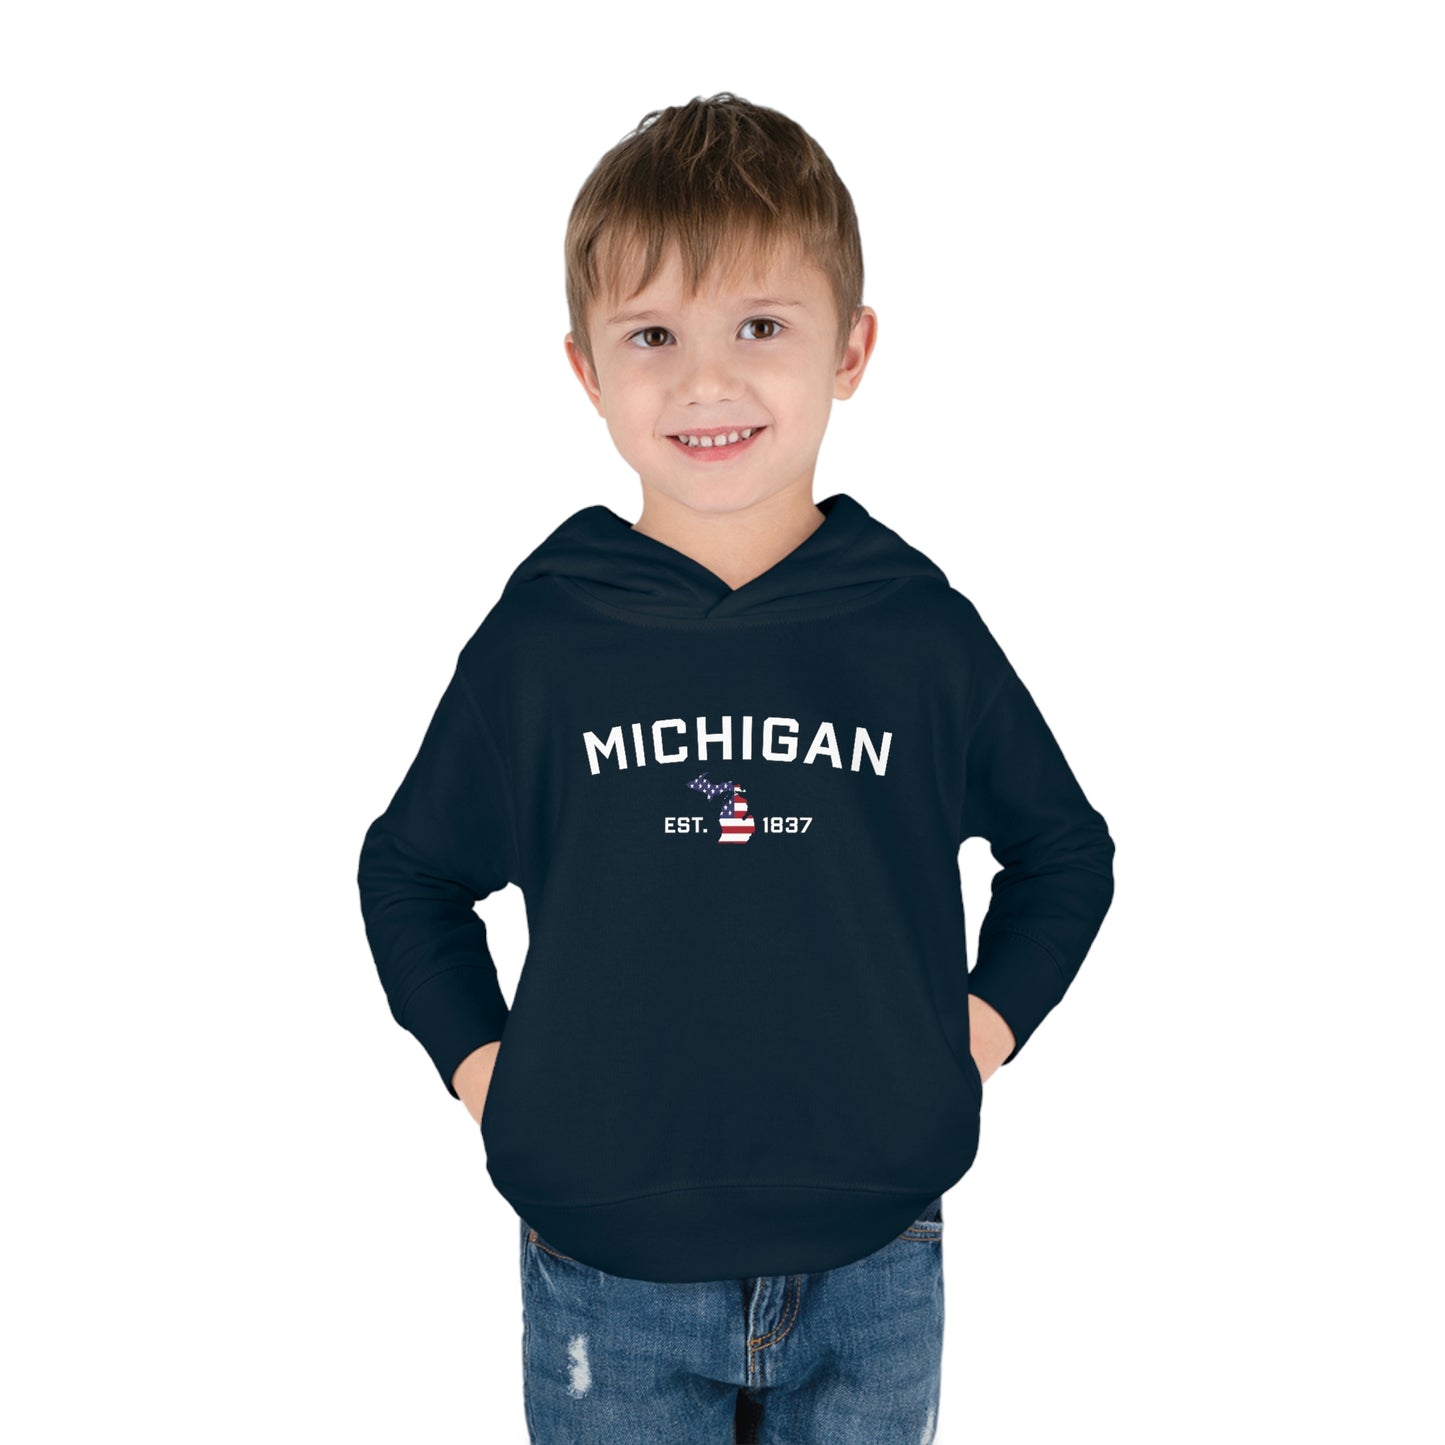 'Michigan EST 1837' Hoodie (With MI USA Flag Outline) | Unisex Toddler